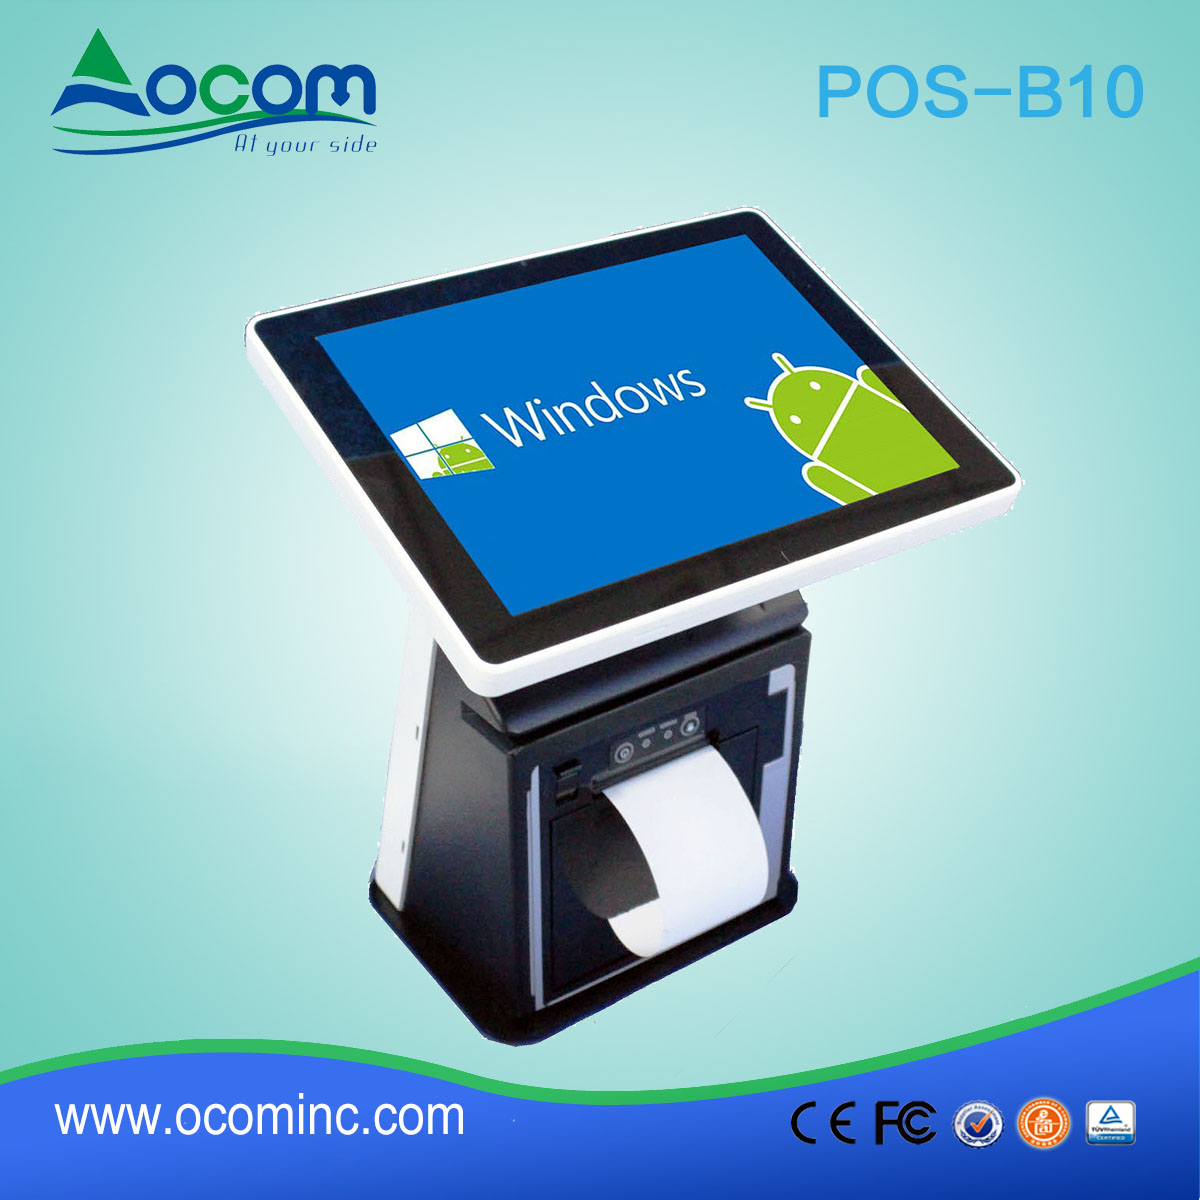 32GB 10" touch restaurant windows pos computer with optional Android OS